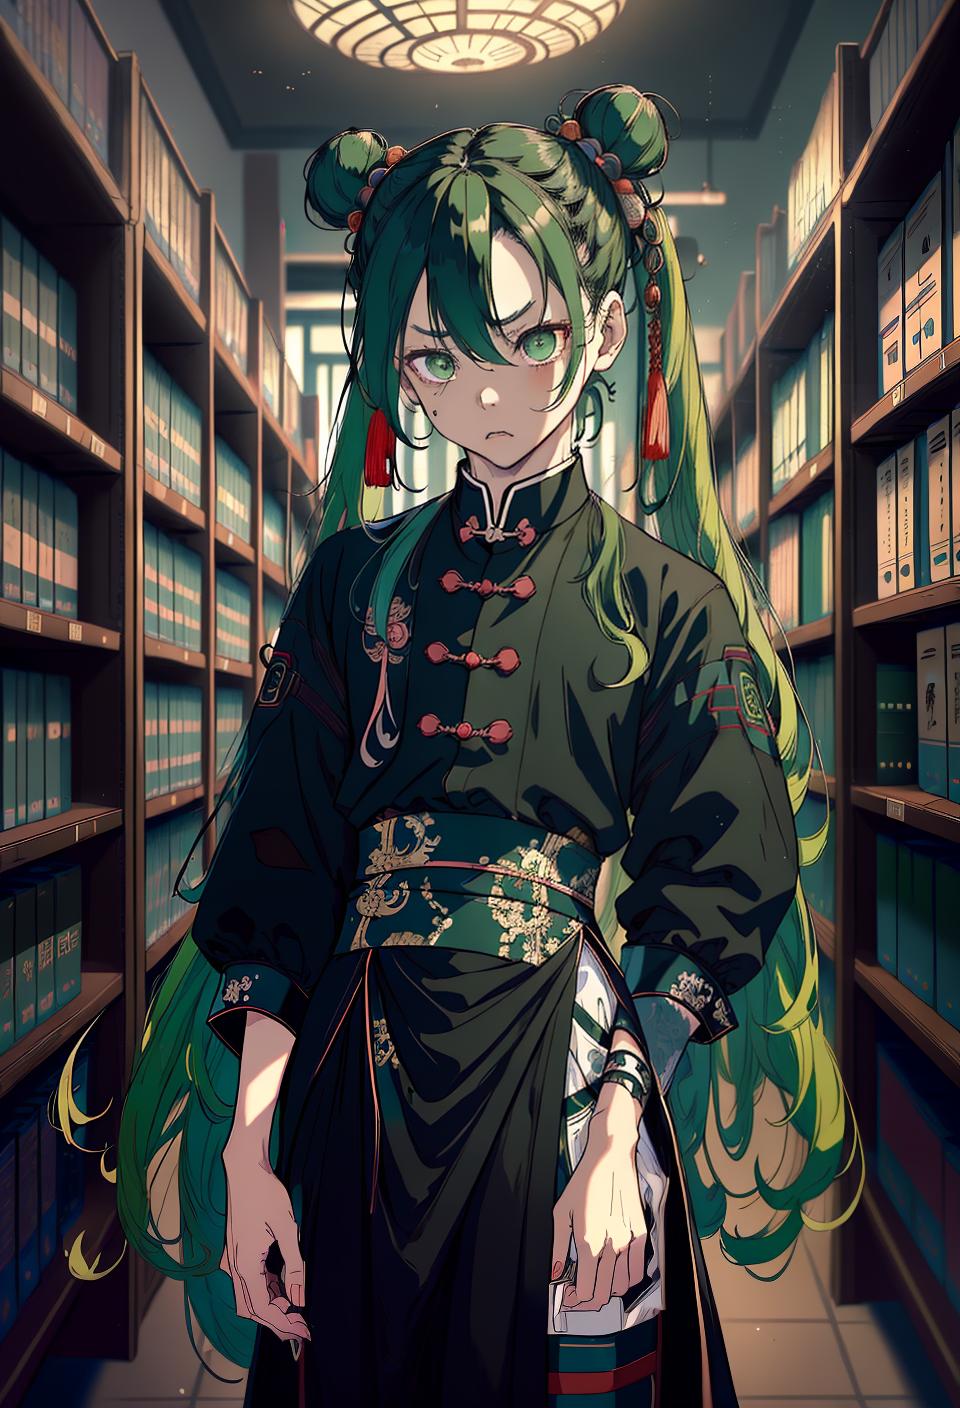  ((trending, highres, masterpiece, cinematic shot)), 1boy, chibi, male goth clothing, library scene, very long curly green hair, hair in Chinese buns, narrow heterochromia eyes, psychopath, crazy personality, bored expression, dark skin, chaotic, observant